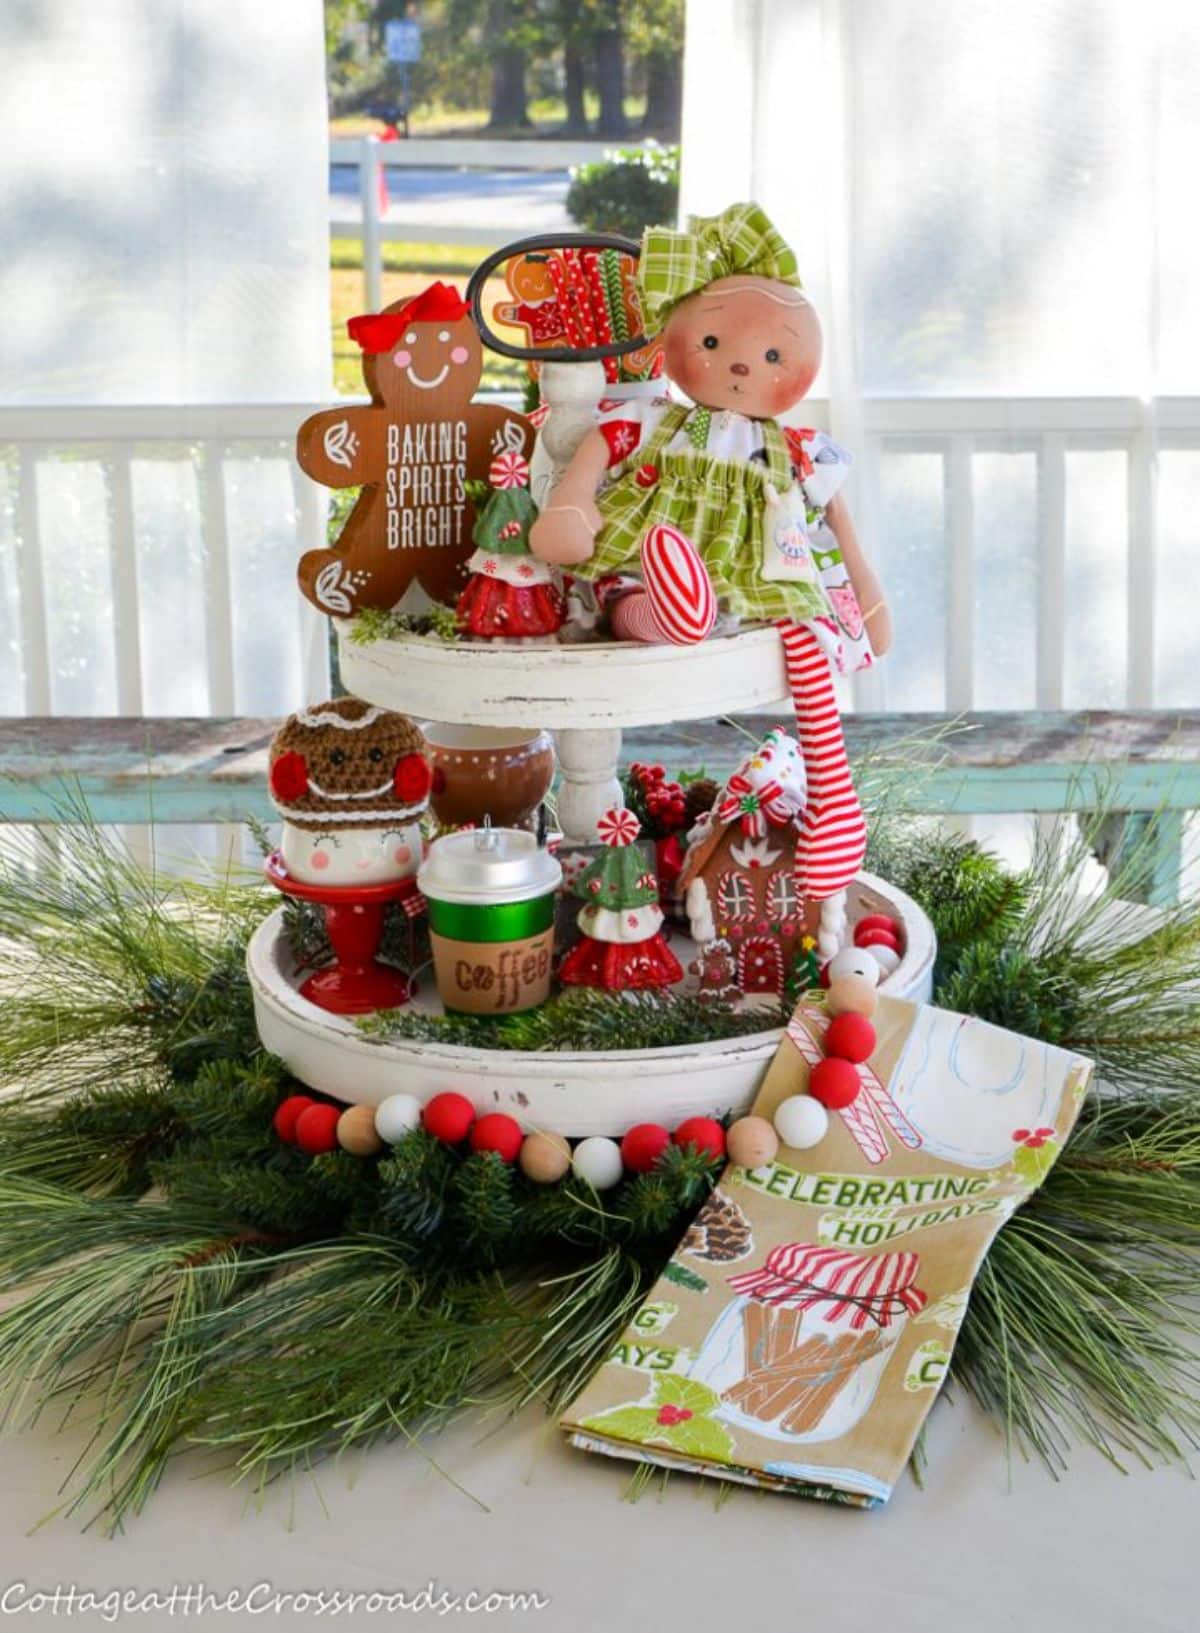 Delicious-looking gingerbread tiered tray on a table.